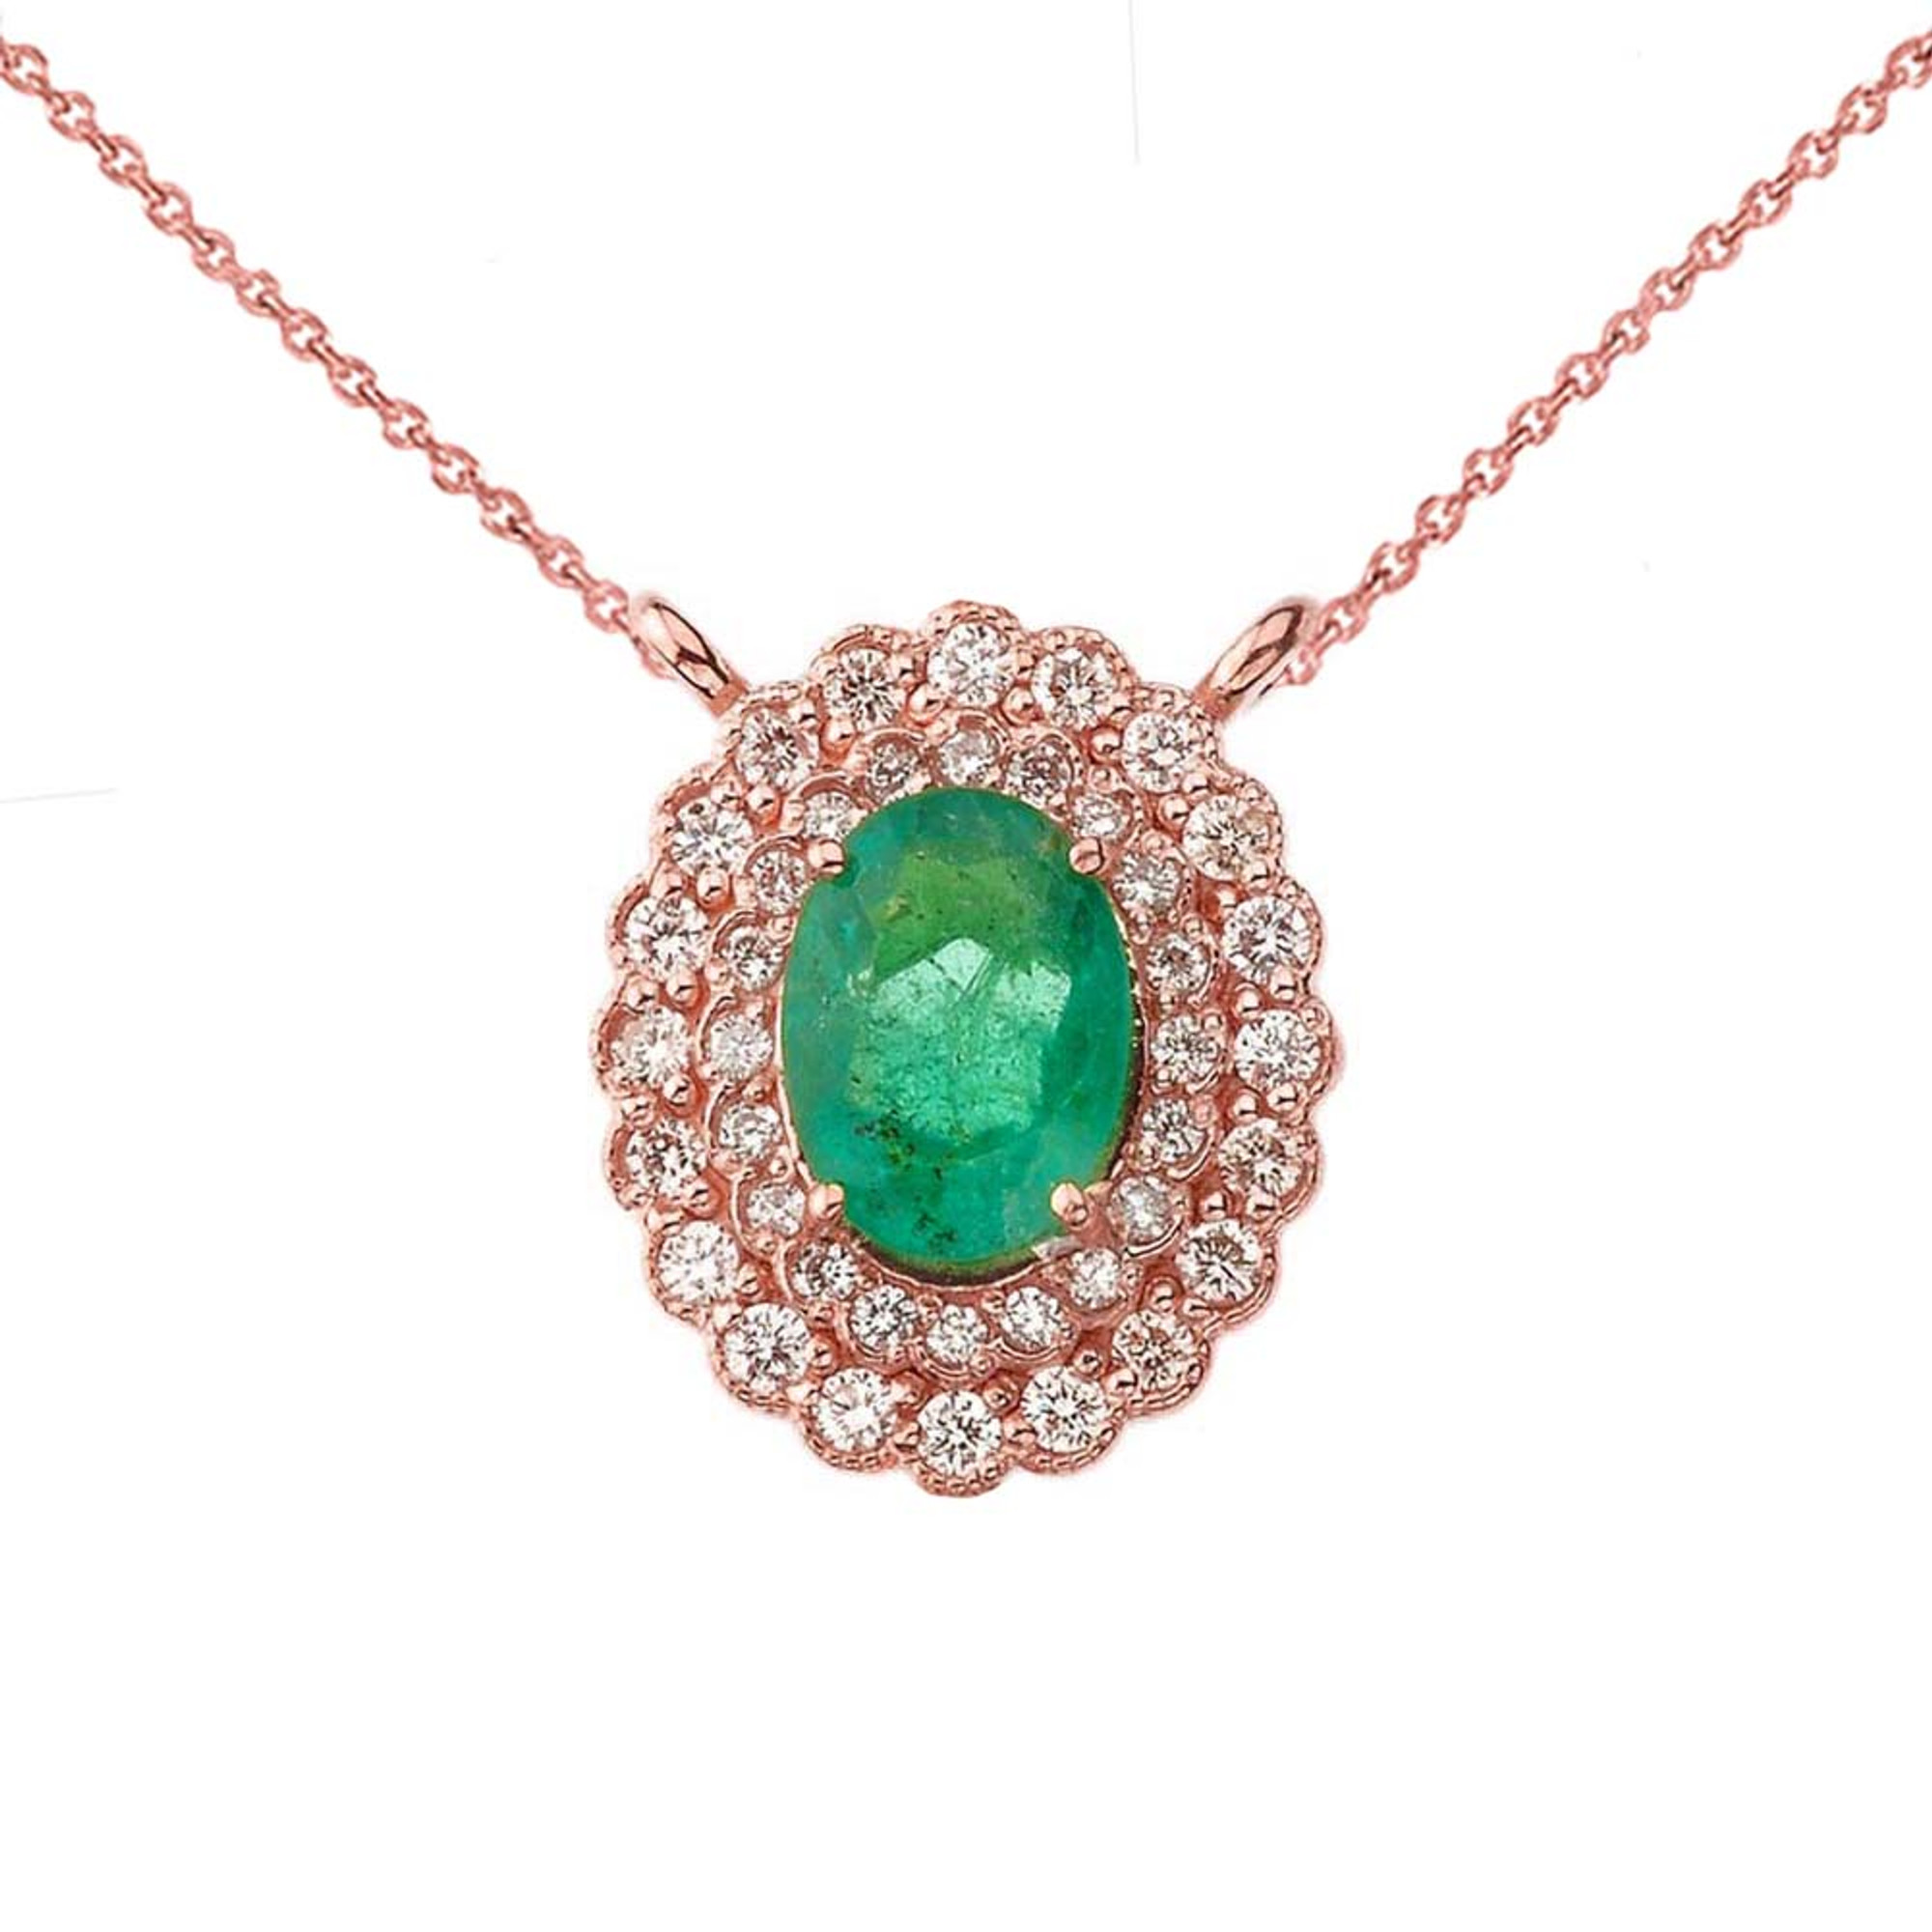 LP Solid 18K Rose Gold Pendant 0.82 Carats Natural Emerald & 0.028 Carats  Diamond Necklace Classic Style with Silver Chain